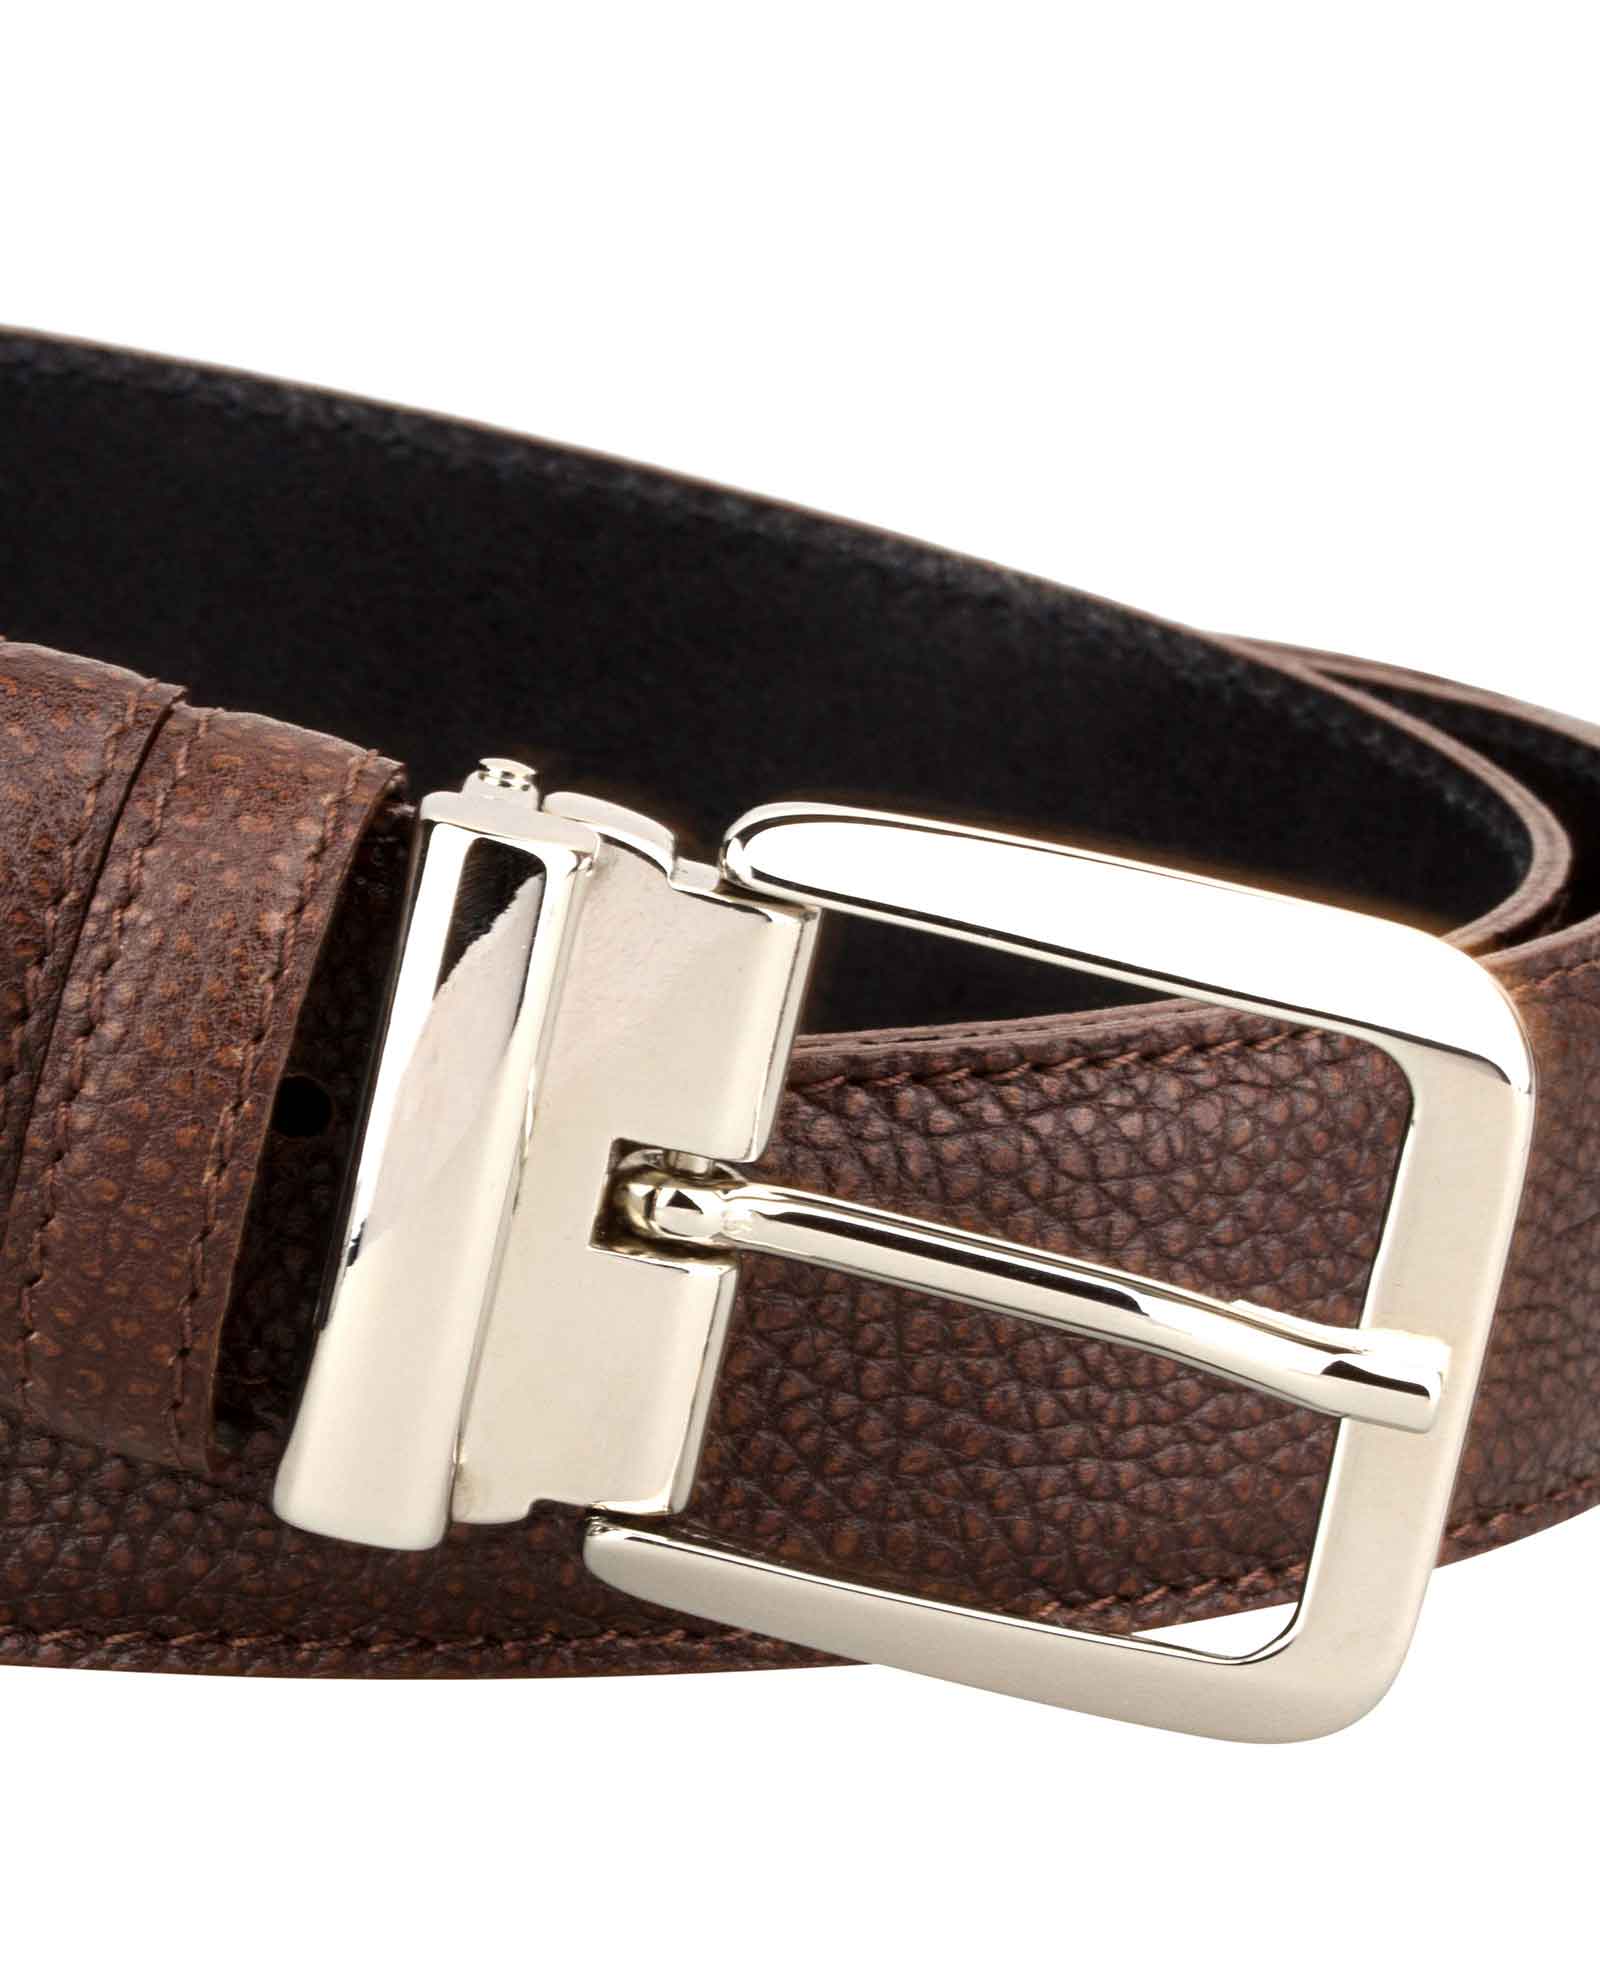 Buy Leather Mens Brown Belt - Italian Buckle - Capo Pelle - Free Shipping